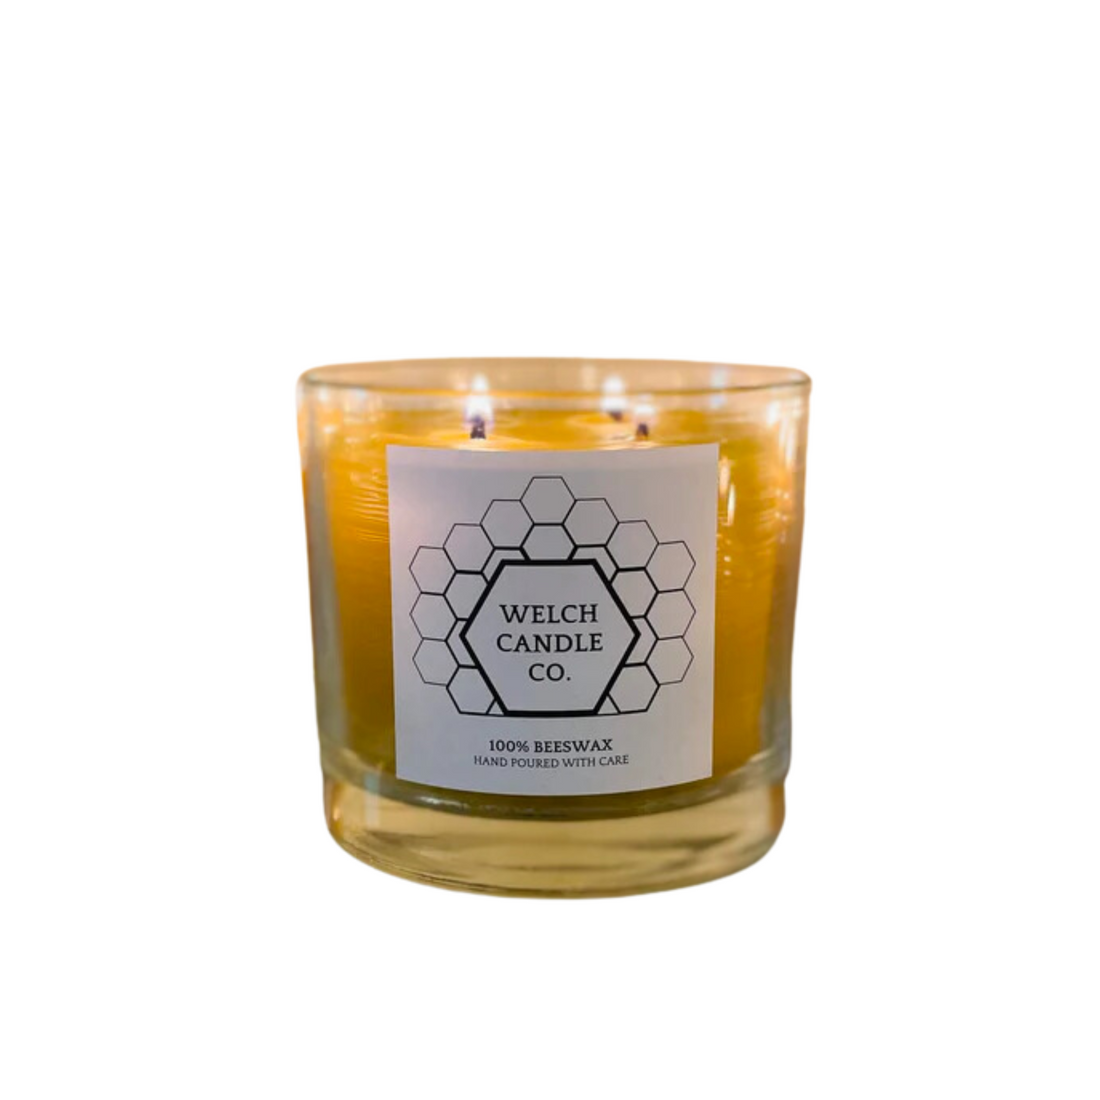 WELCH BEESWAX CANDLE